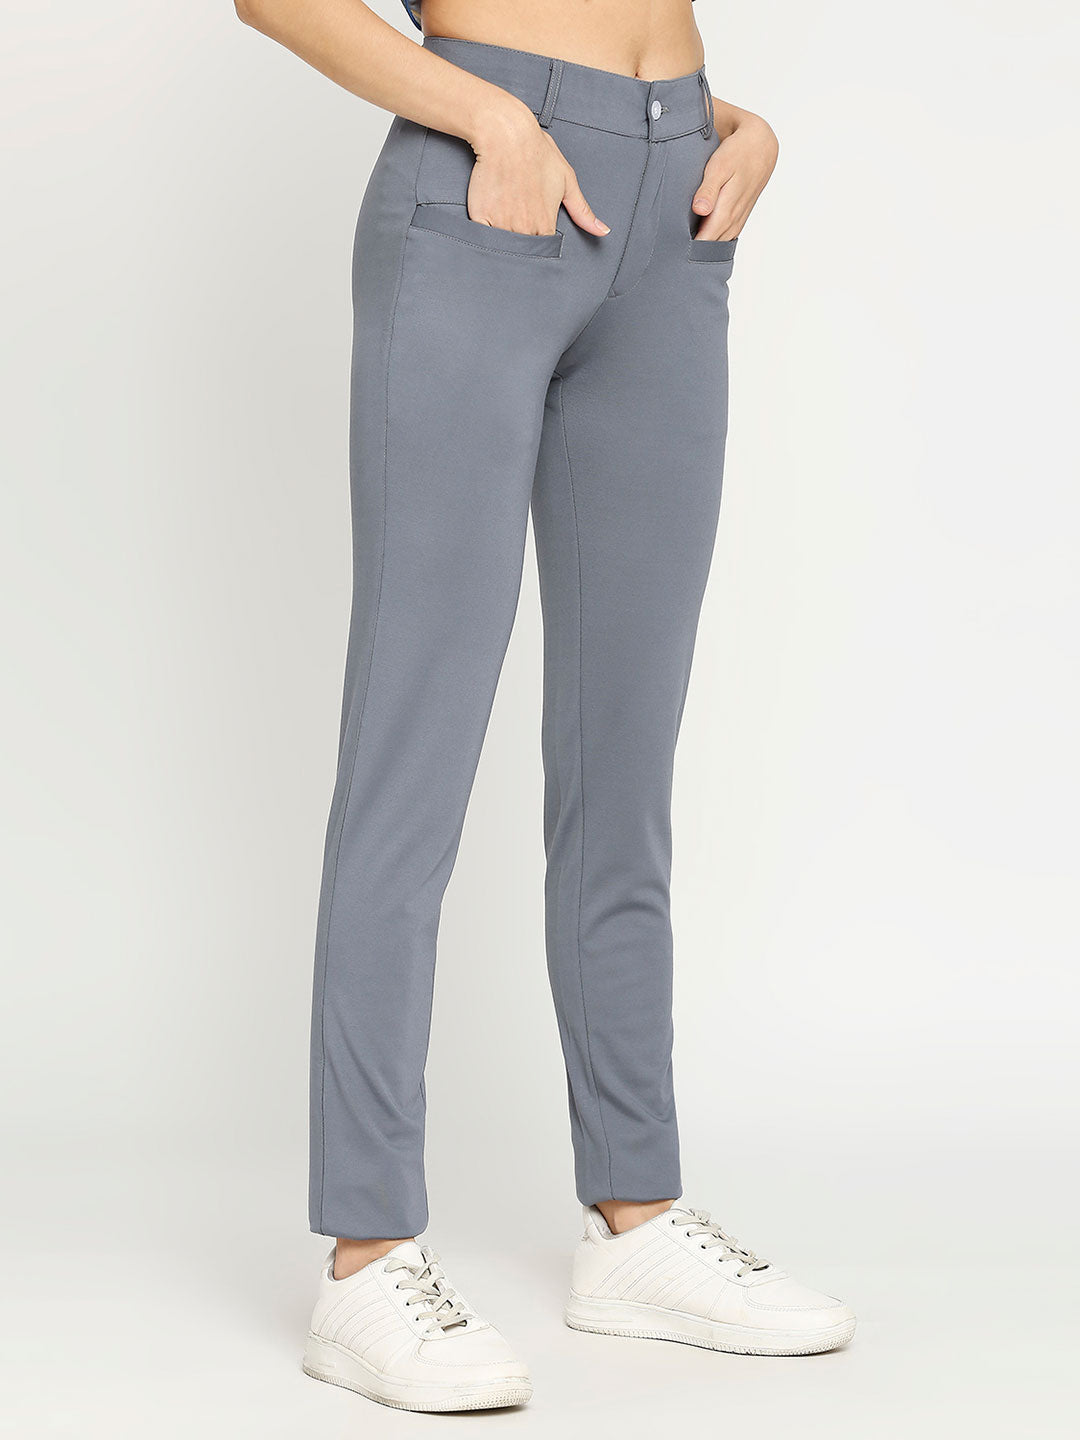 2020 Best Travel Pants For Women - Comfortable, Functional, & Stylish